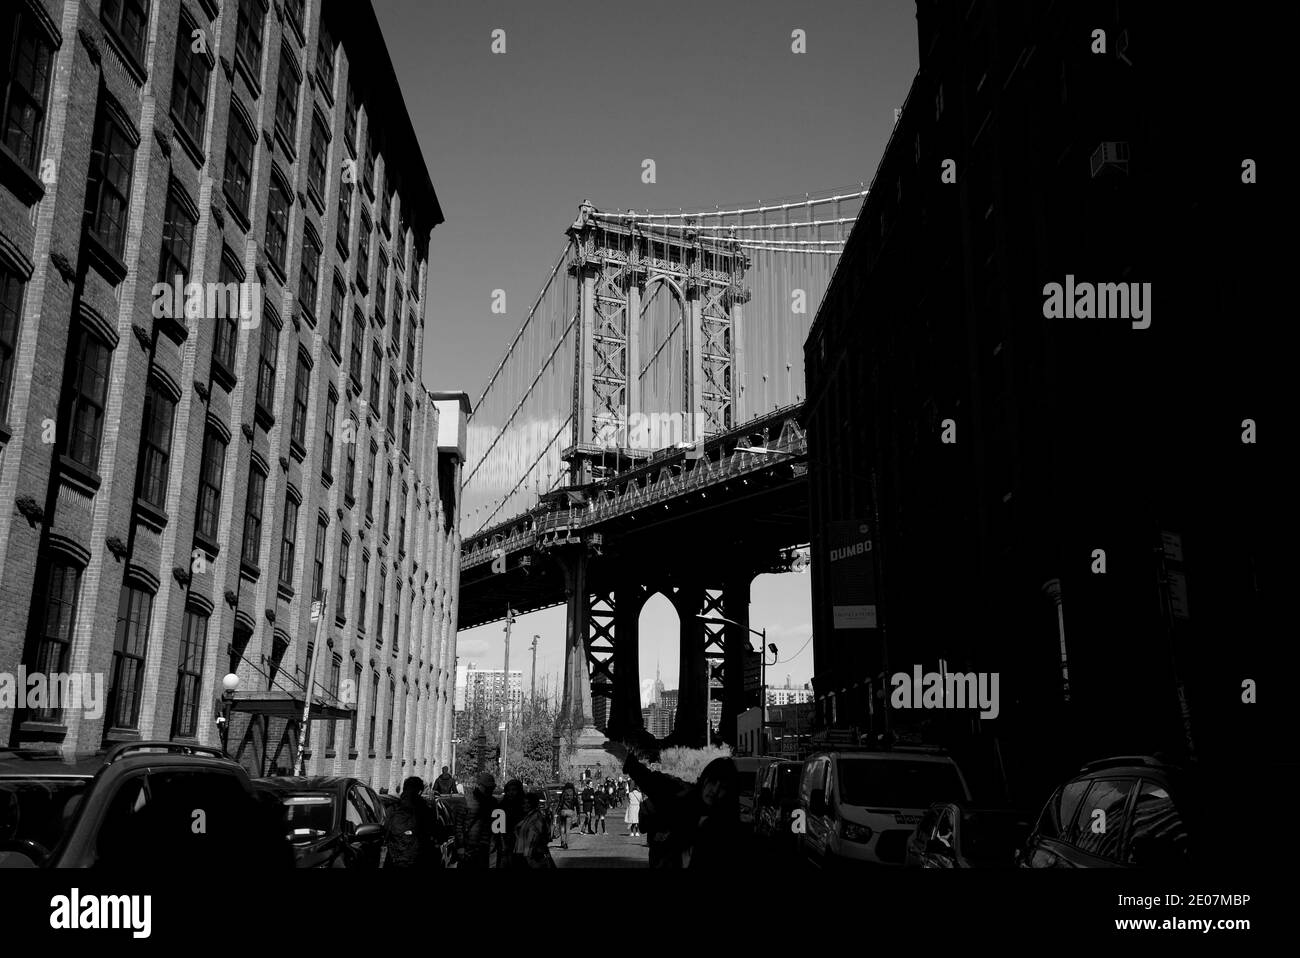 The Manhattan Bridge: Suspension bridge over the East River in New York City, connecting Lower Manhattan and Downtown Brooklyn, DUMBO. Black and white Stock Photo